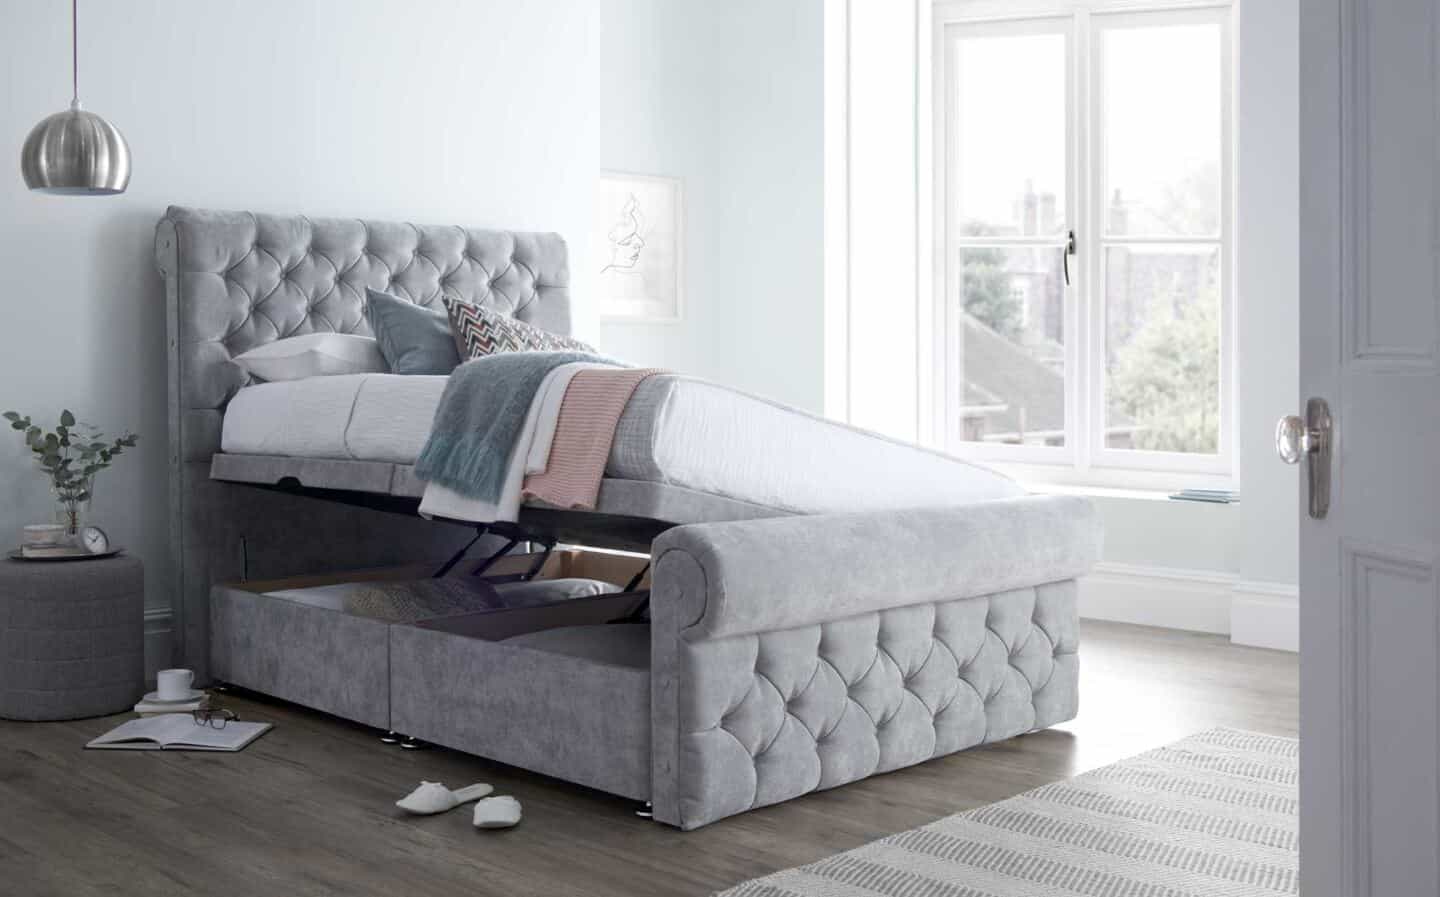 An open grey upholstered ottoman bed   in a bright an airy bedroom with large windows